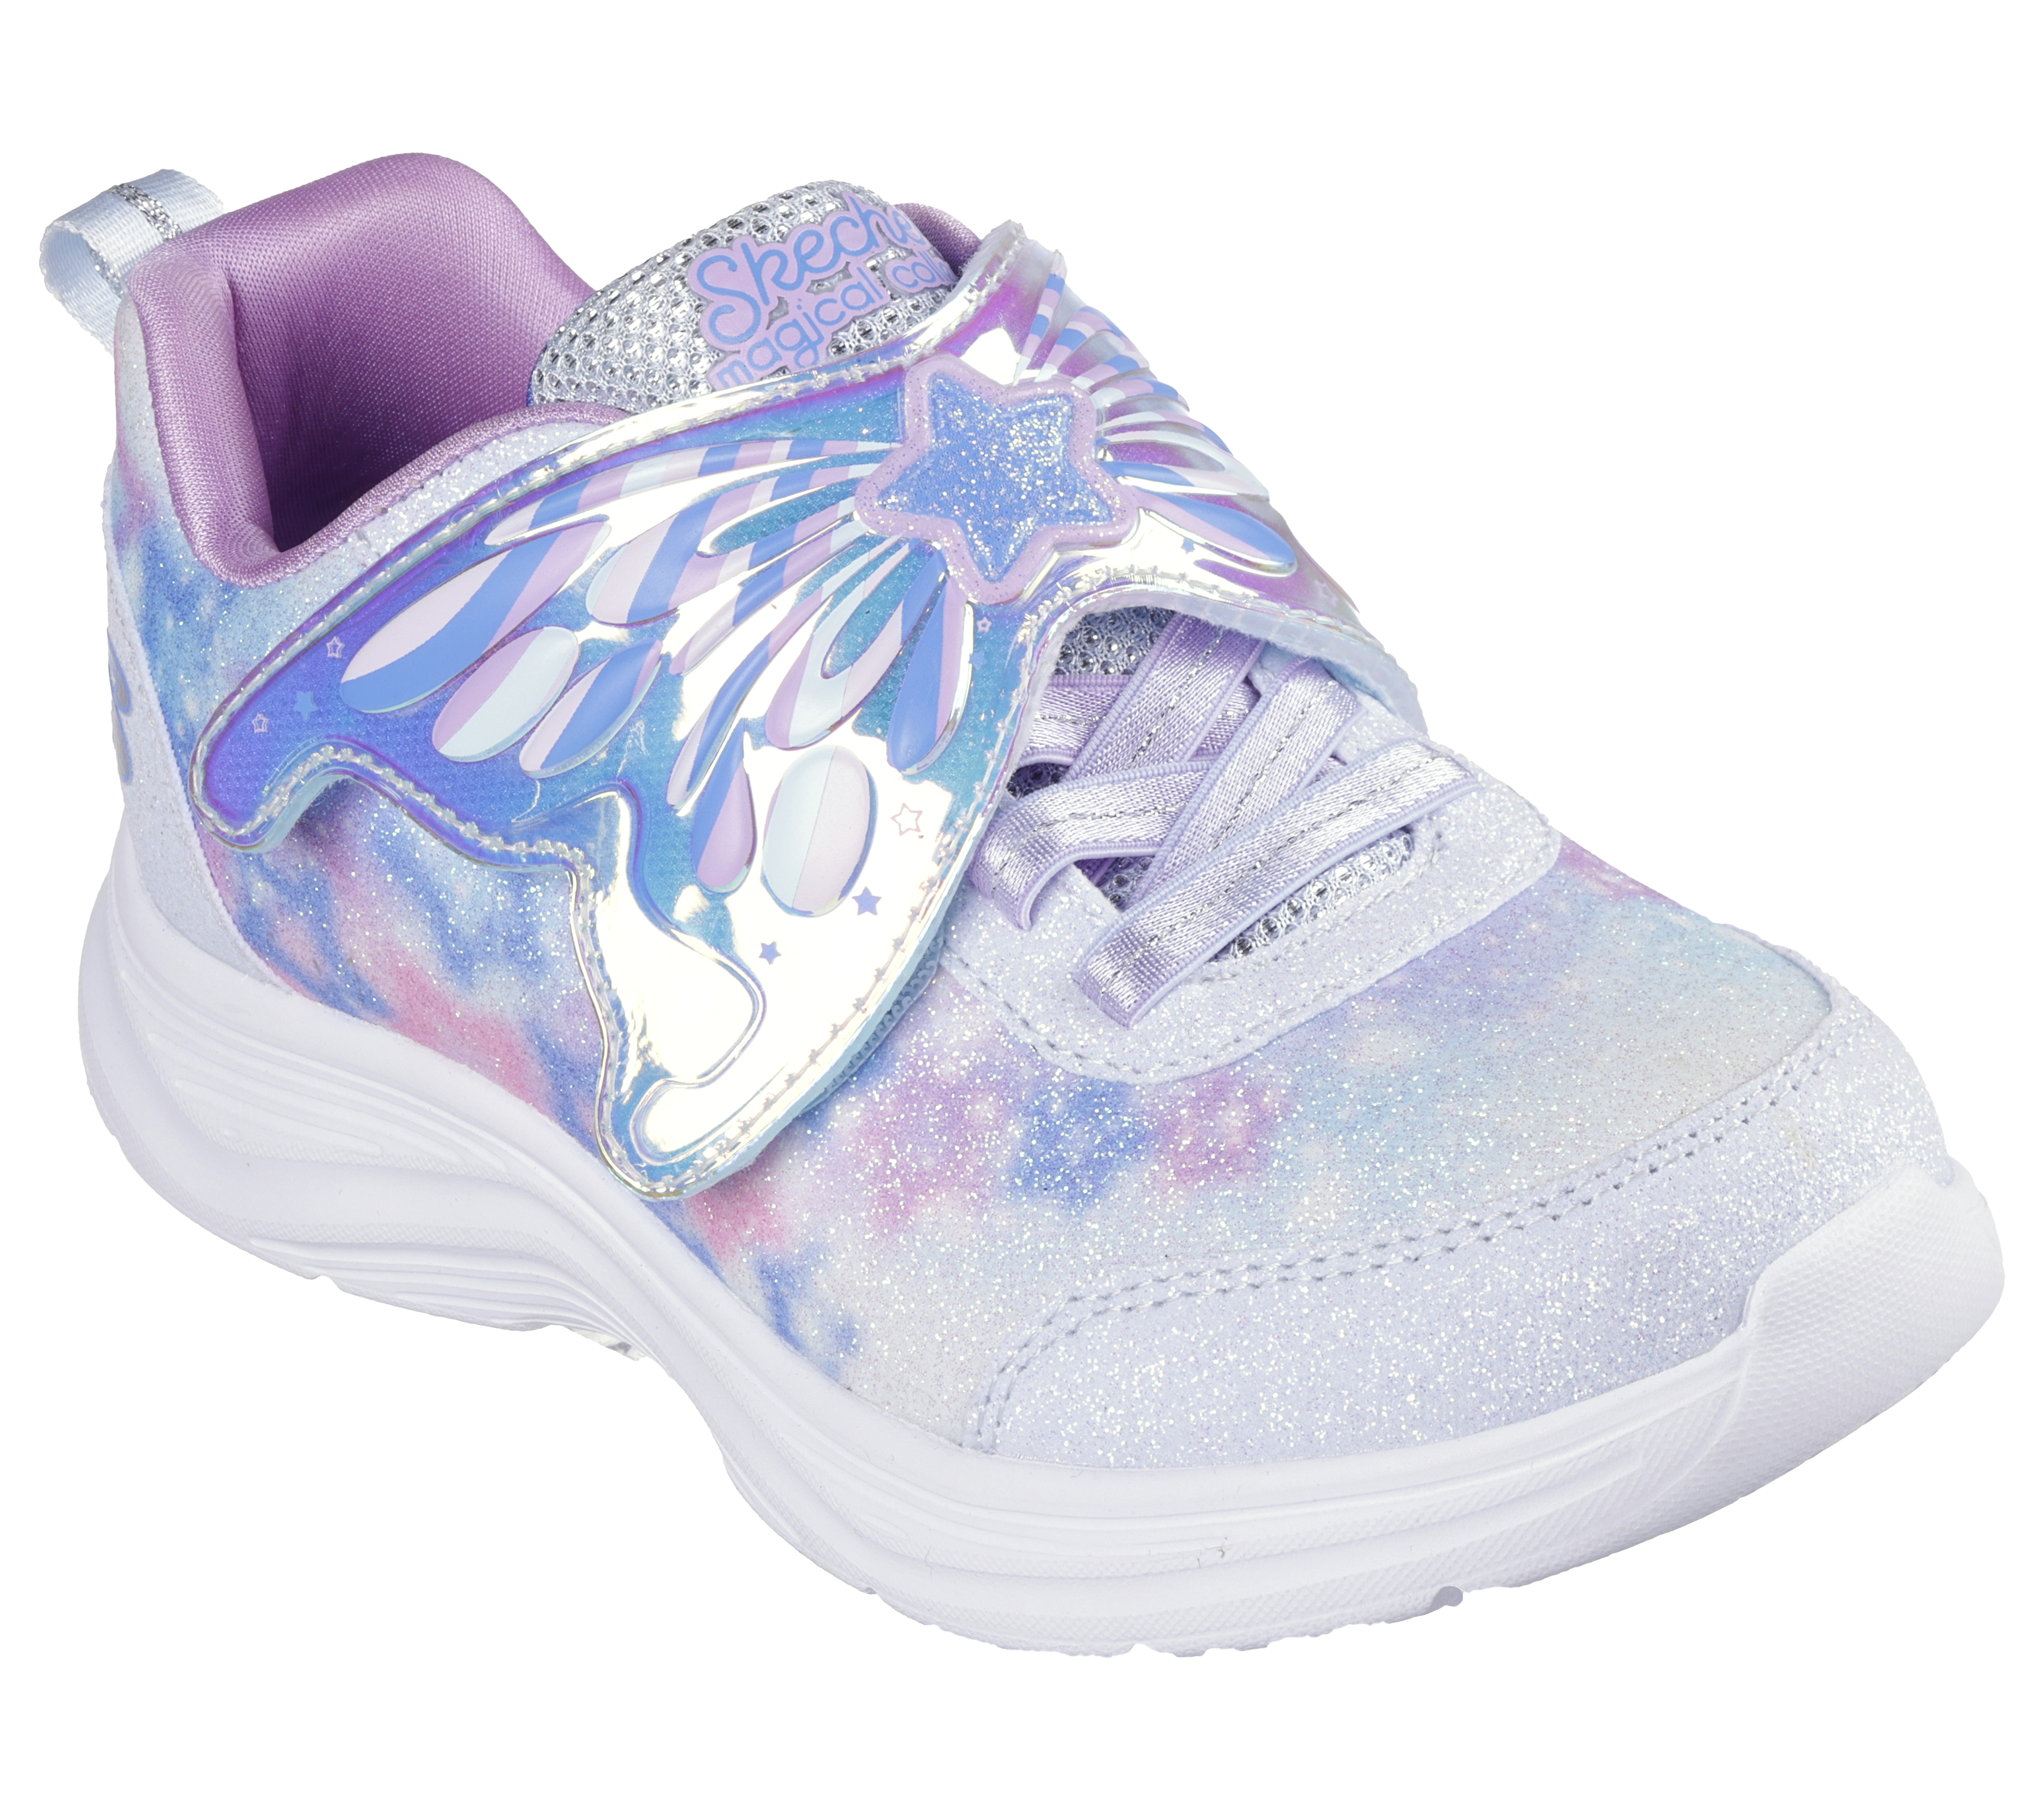 Glimmer - Magical Wings | SKECHERS